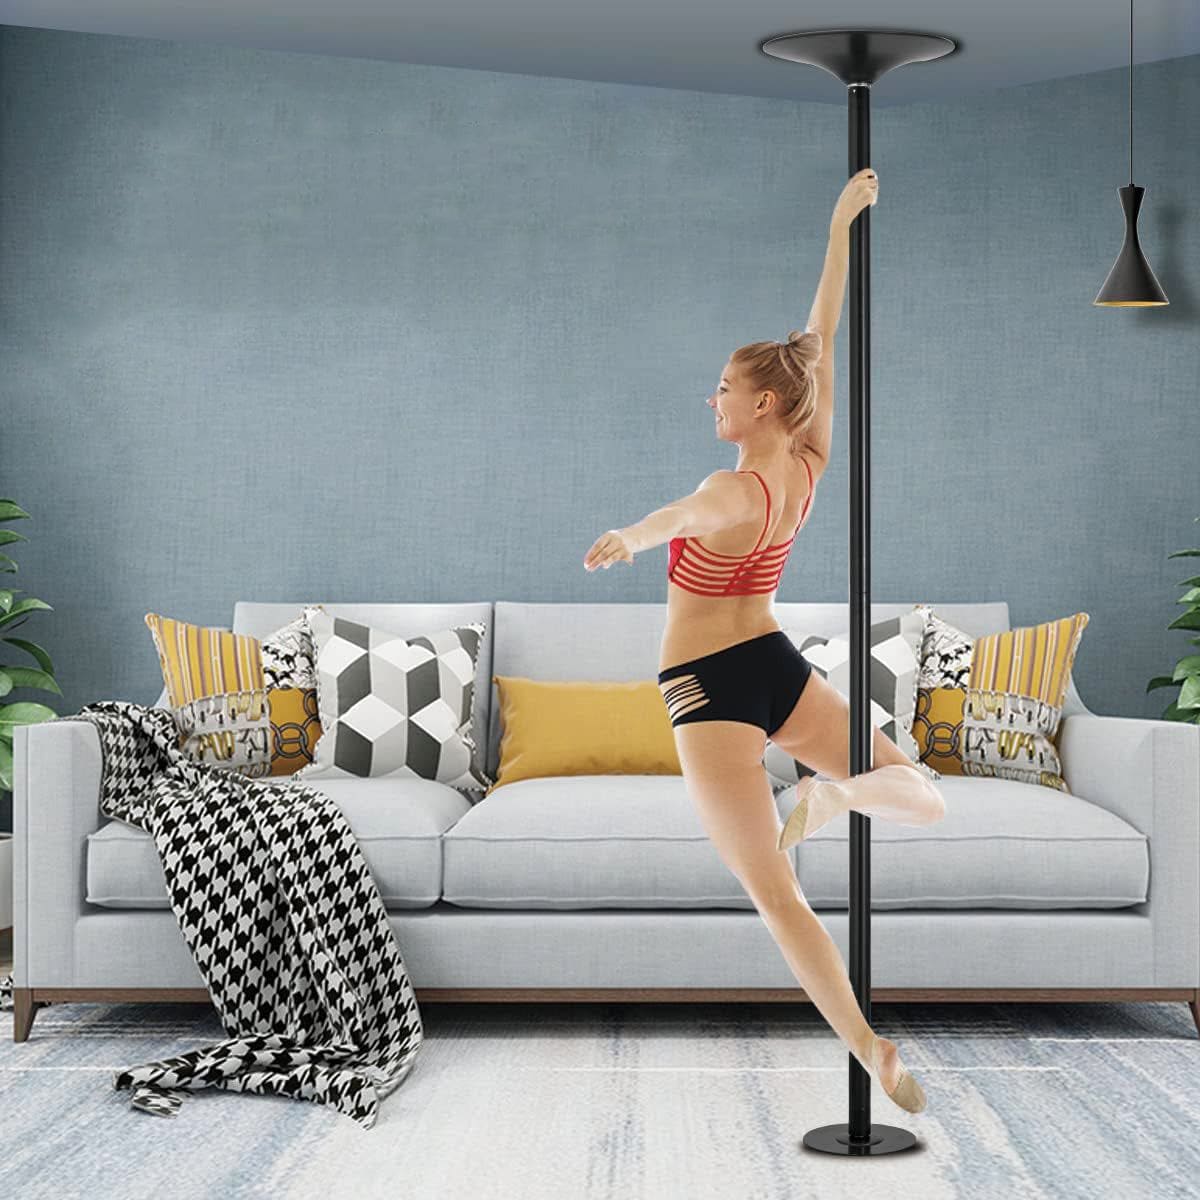 MEMAX Portable Dancing Pole - Static and Spinning - Black